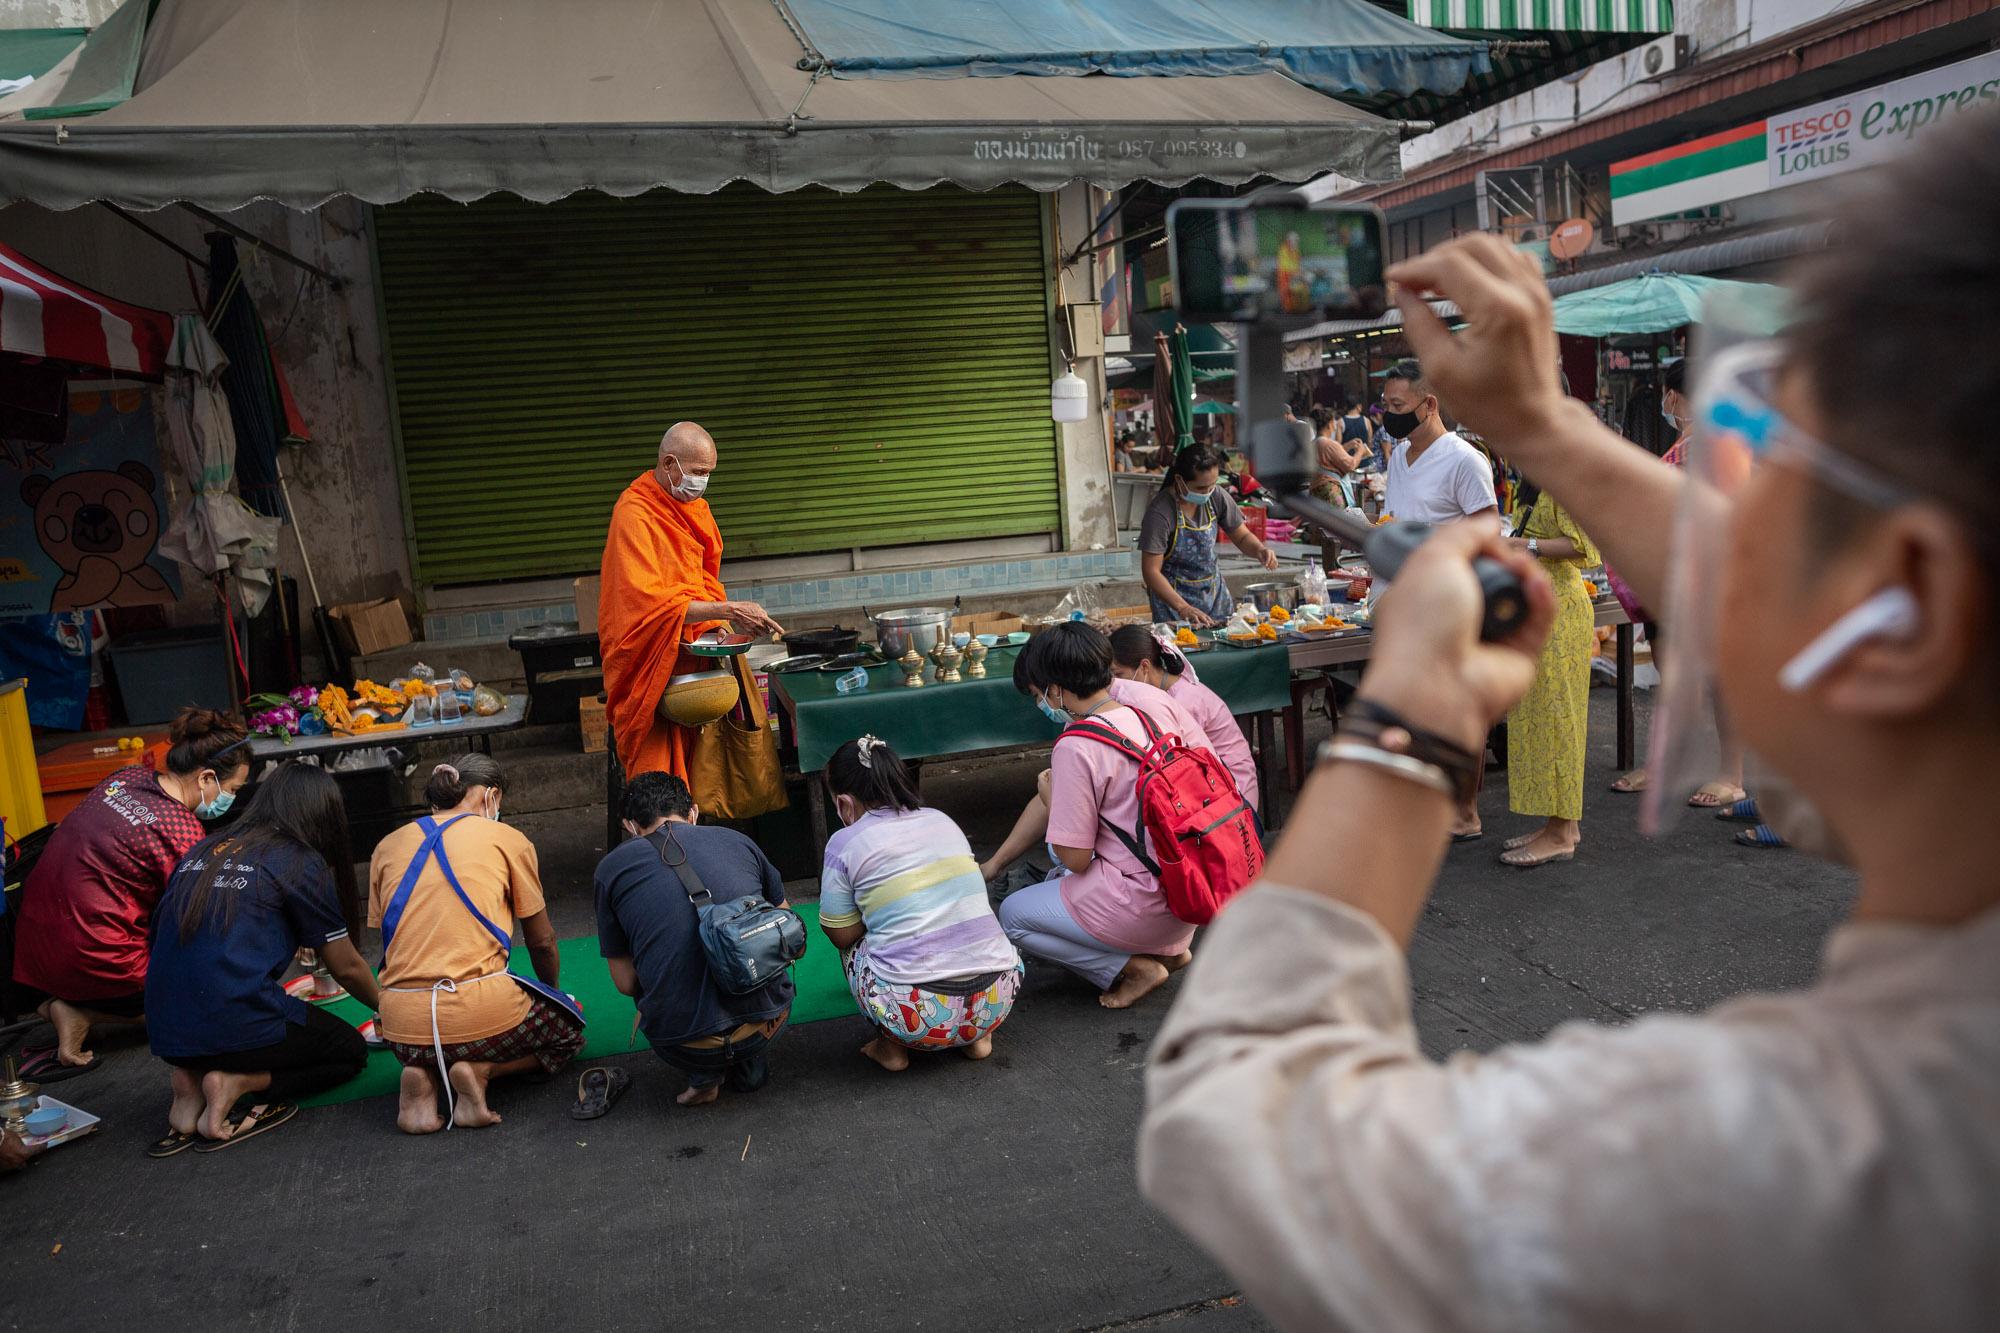 Hnoi Latthitham, 53, leads a virtual tour of Chai Chimplee Temple Market in Bangkok, Thailand, on Monday, February 1, 2021, in Bangkok, Thailand. She shows participants the hustle and bustle of morning life, and stops to explain rituals of alms giving to Buddhist monks.